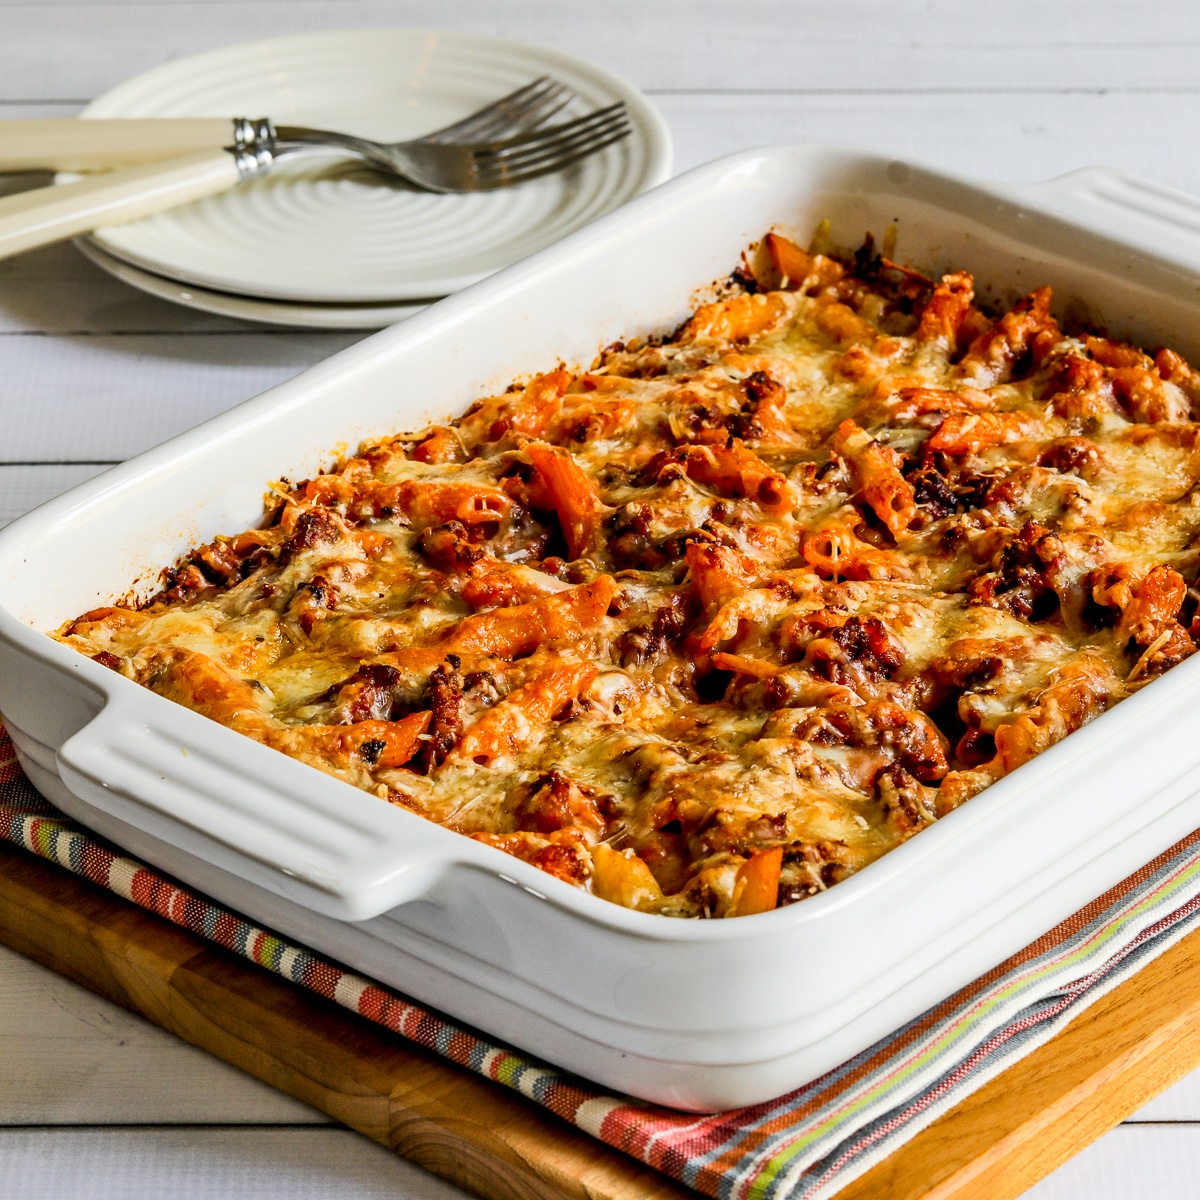 Baked penne with sausage in casserole square image in baking dish